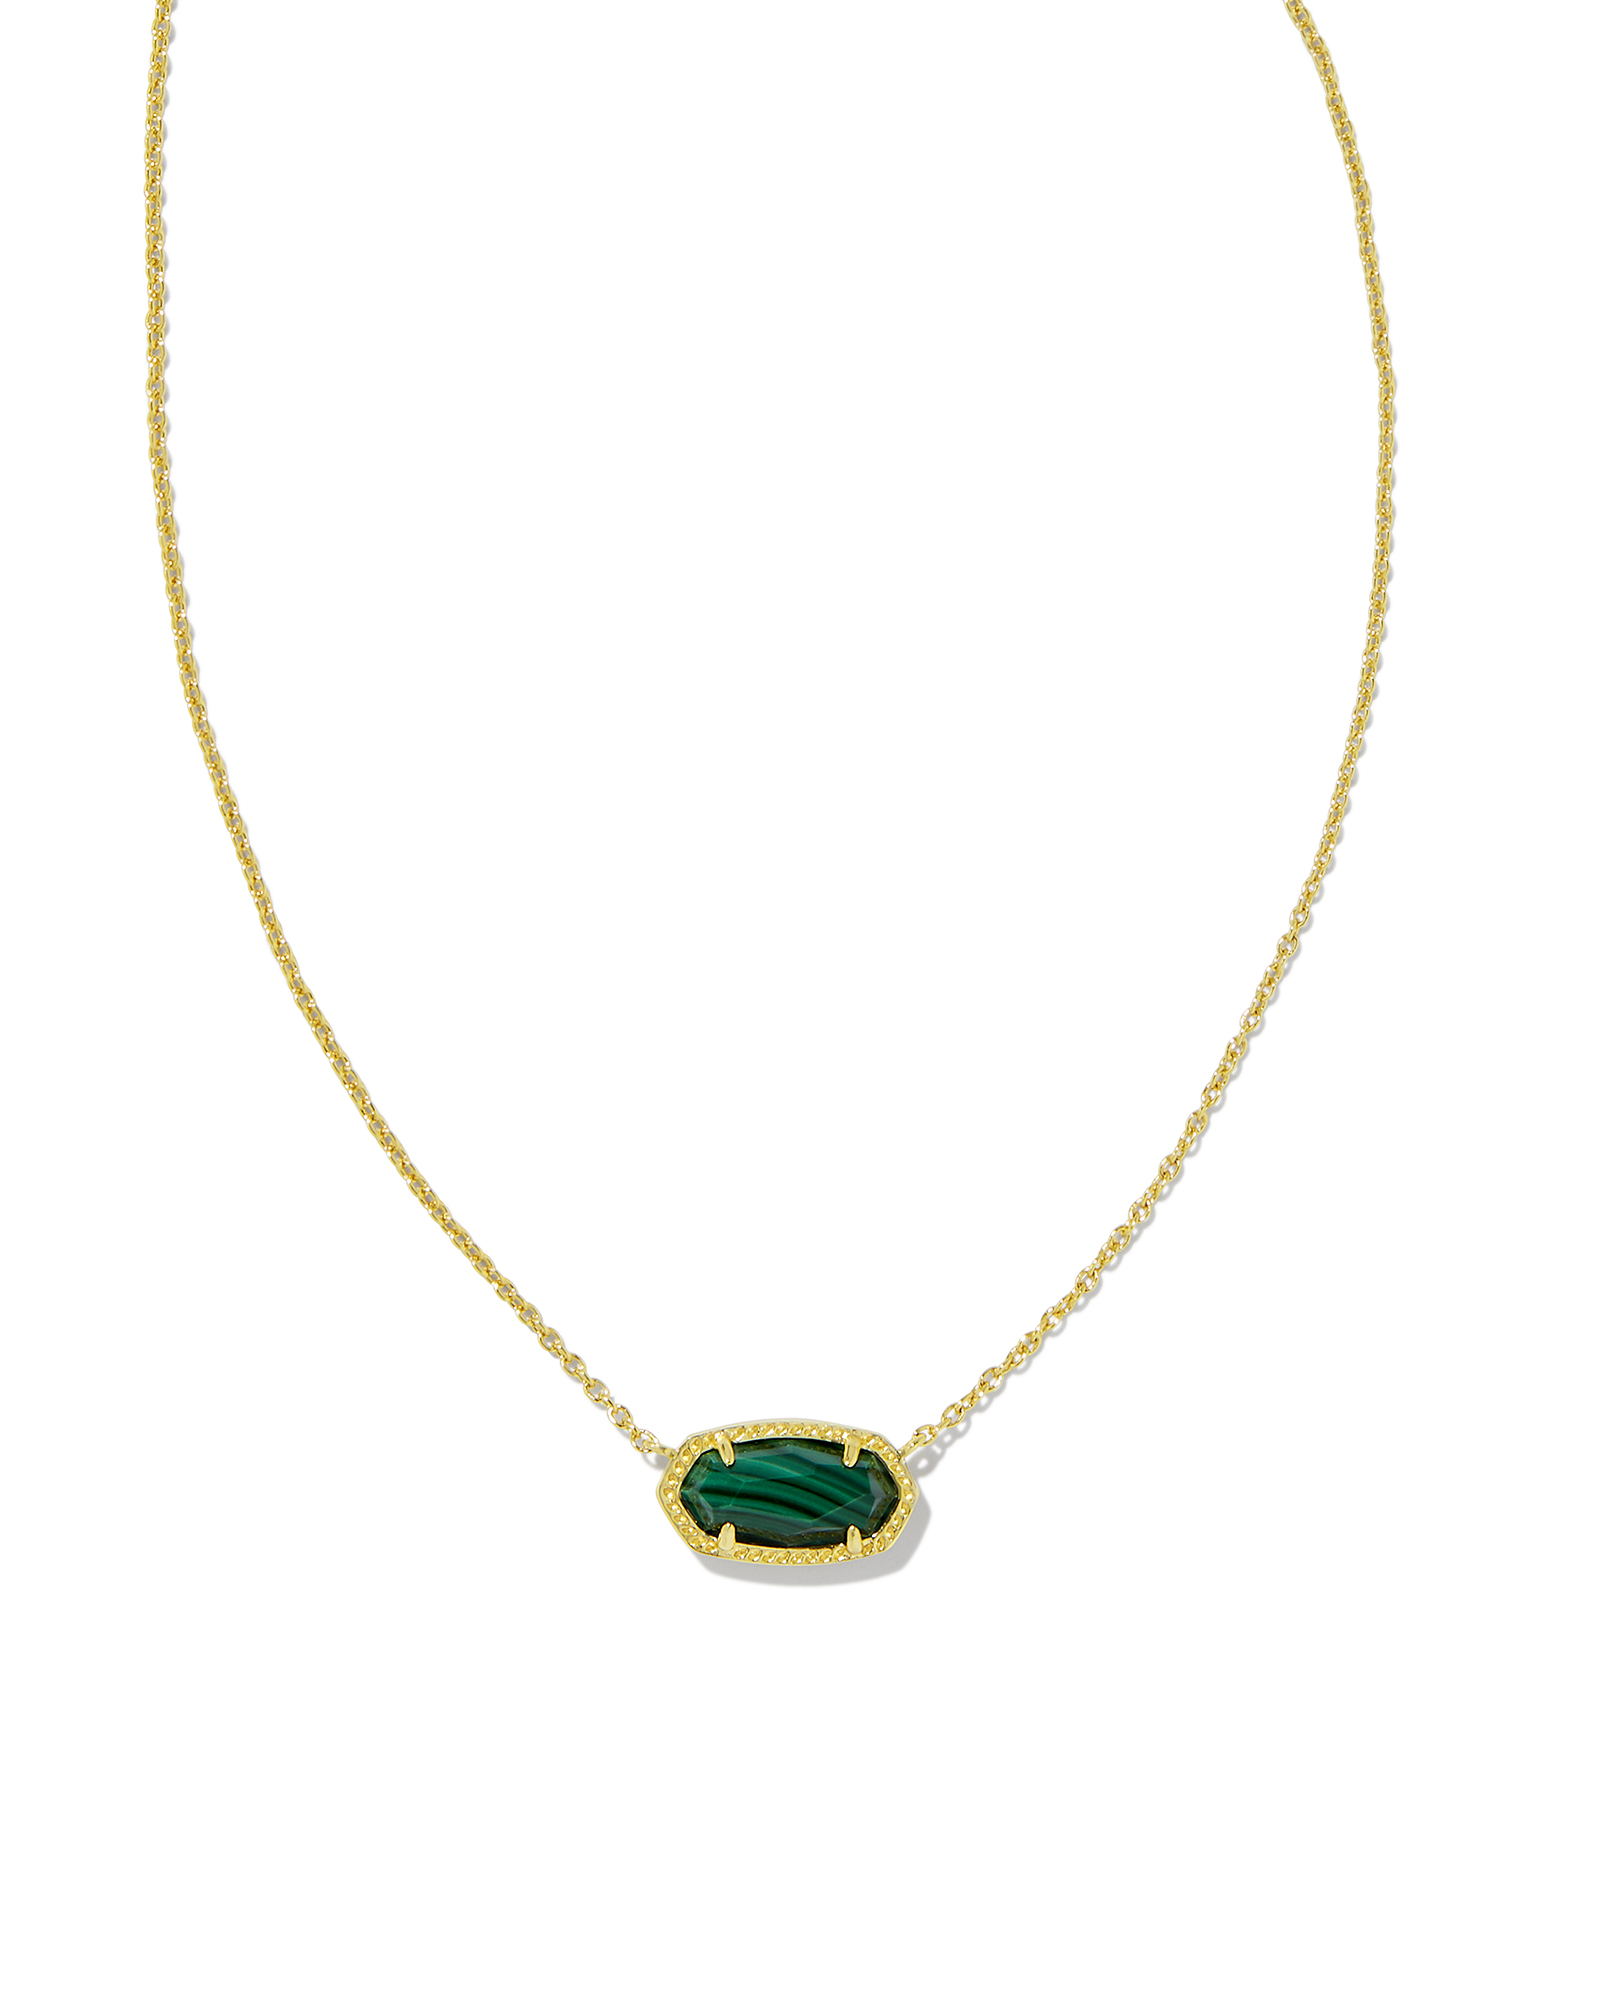 Green diamond necklace in 14k yellow gold | KLENOTA